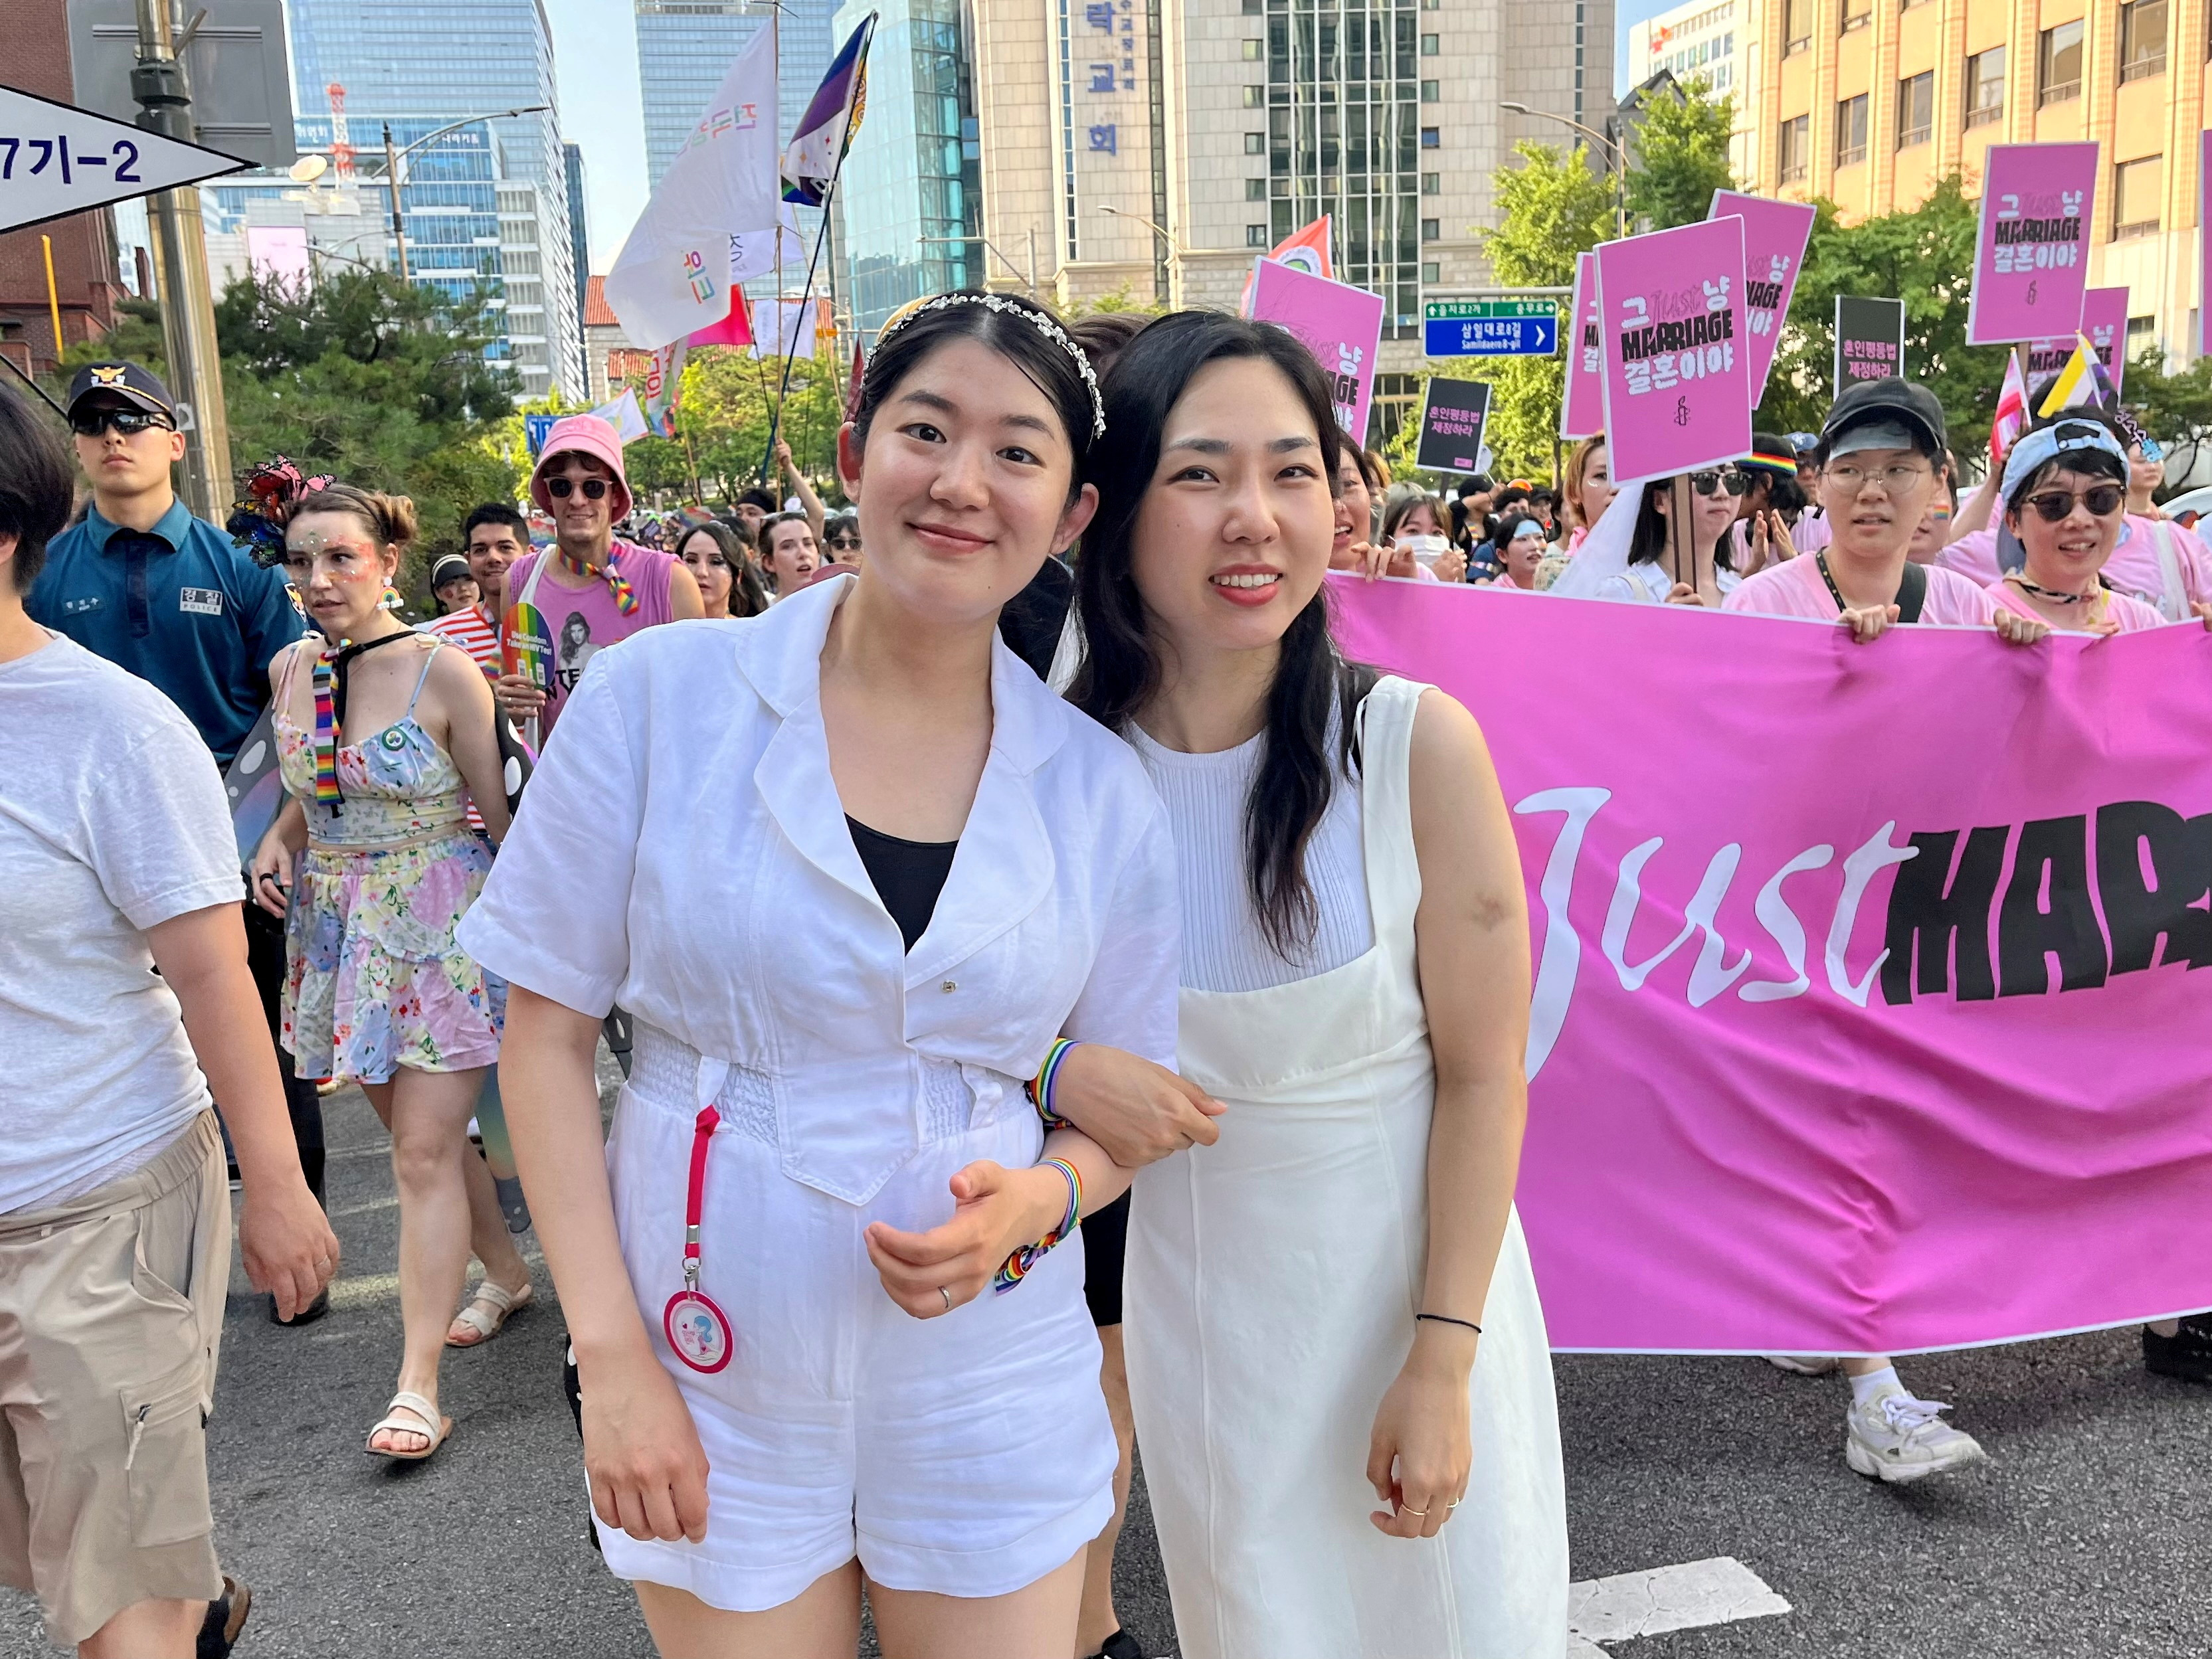 South Korea LGBT festival proceeds, bumped from prime spot by Christian  group